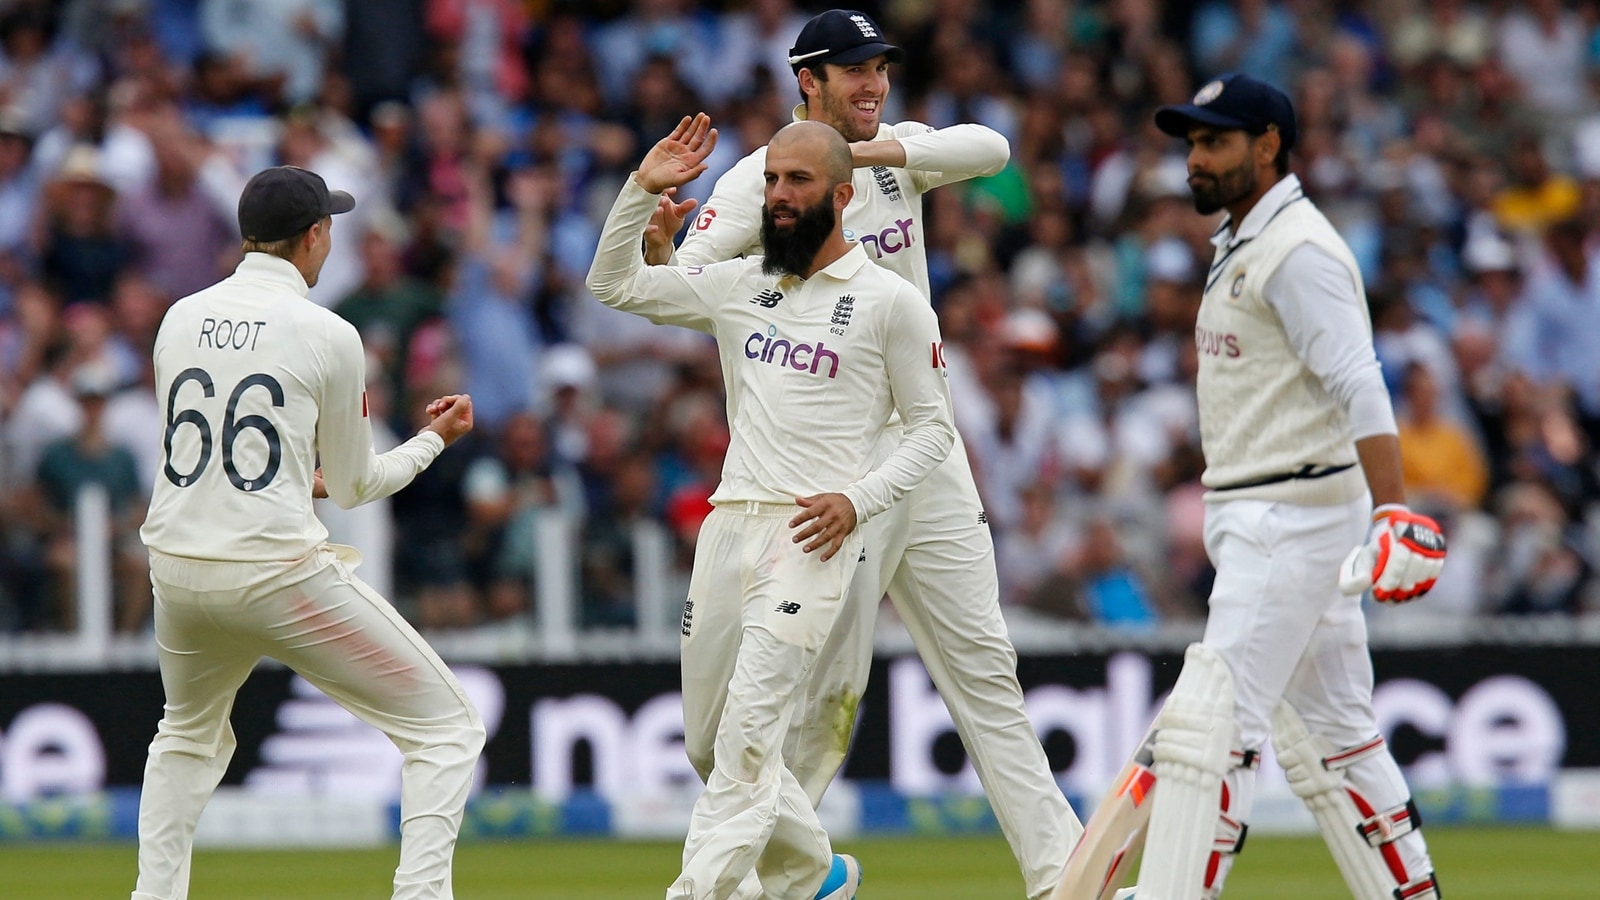 India vs England Highlights 2nd Test Day 4 India 181/6 at stumps, lead England by 154 runs in 2nd innings Hindustan Times